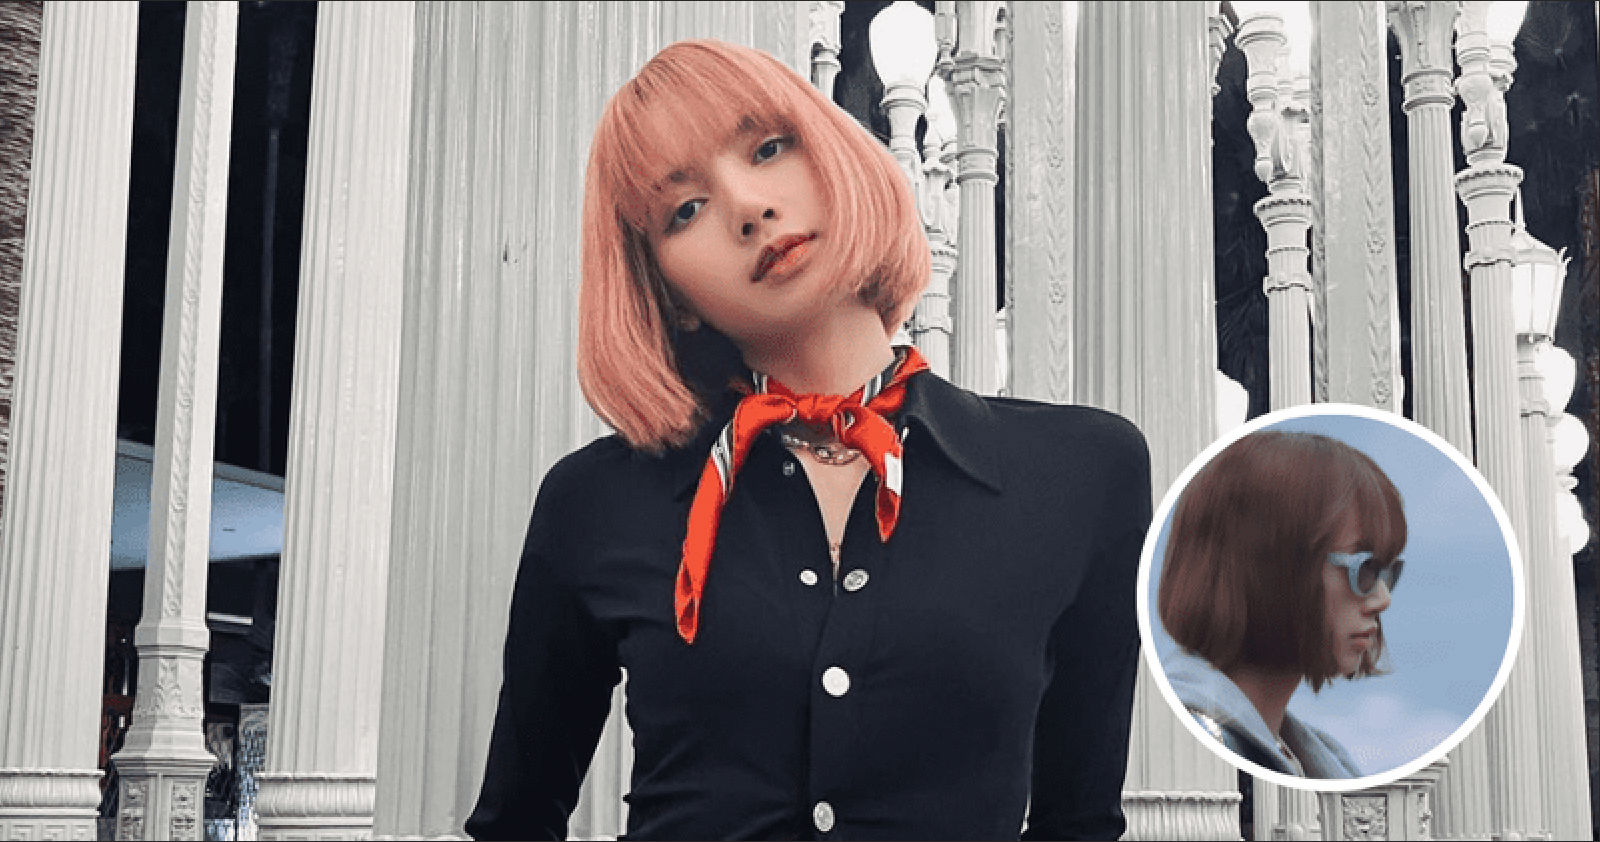 BLACKPINK’s Lisa Makes Her Runway Debut After Recovering From COVID-19